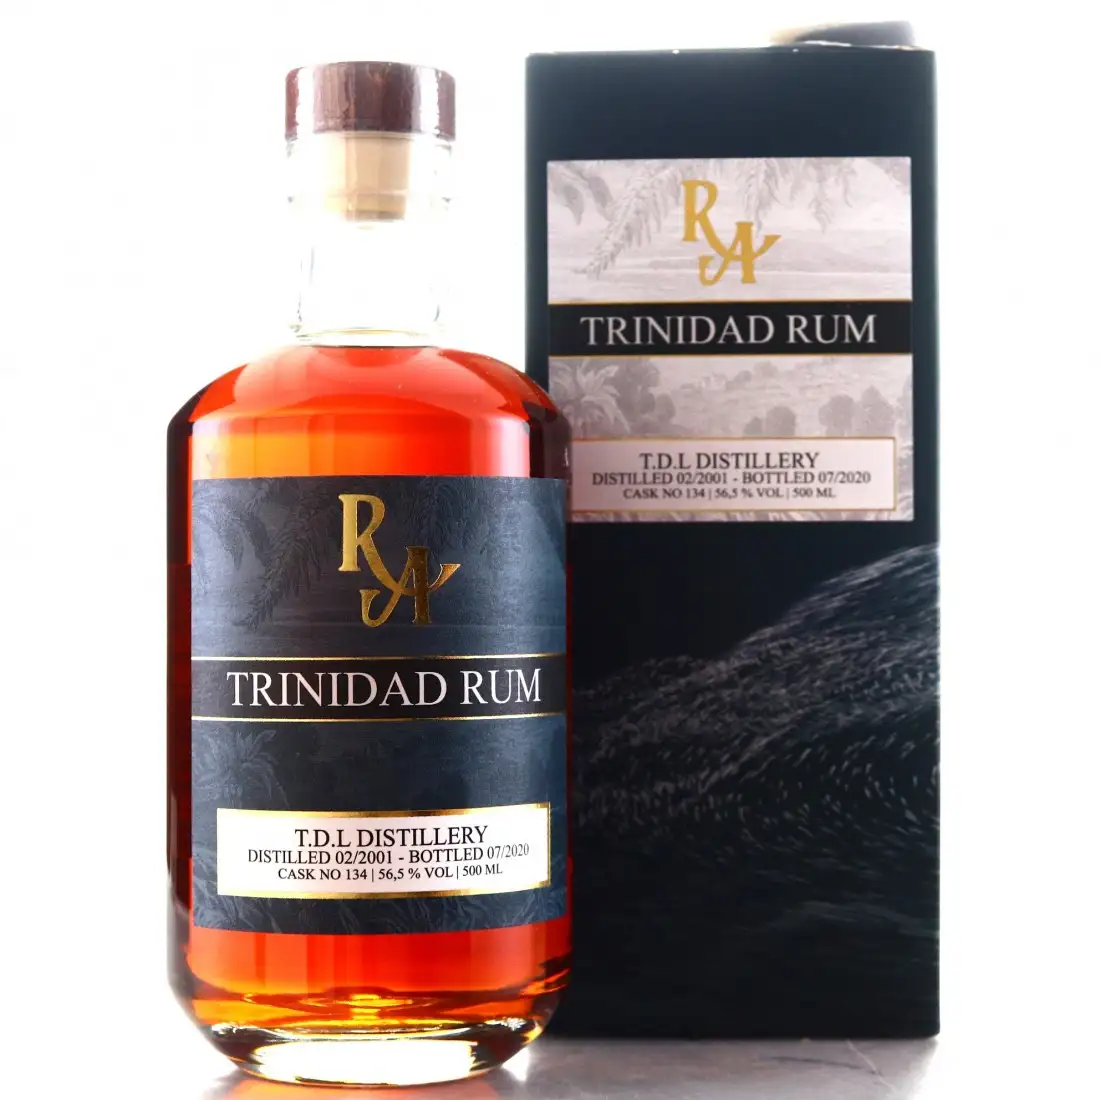 Image of the front of the bottle of the rum Rum Artesanal Trinidad Rum